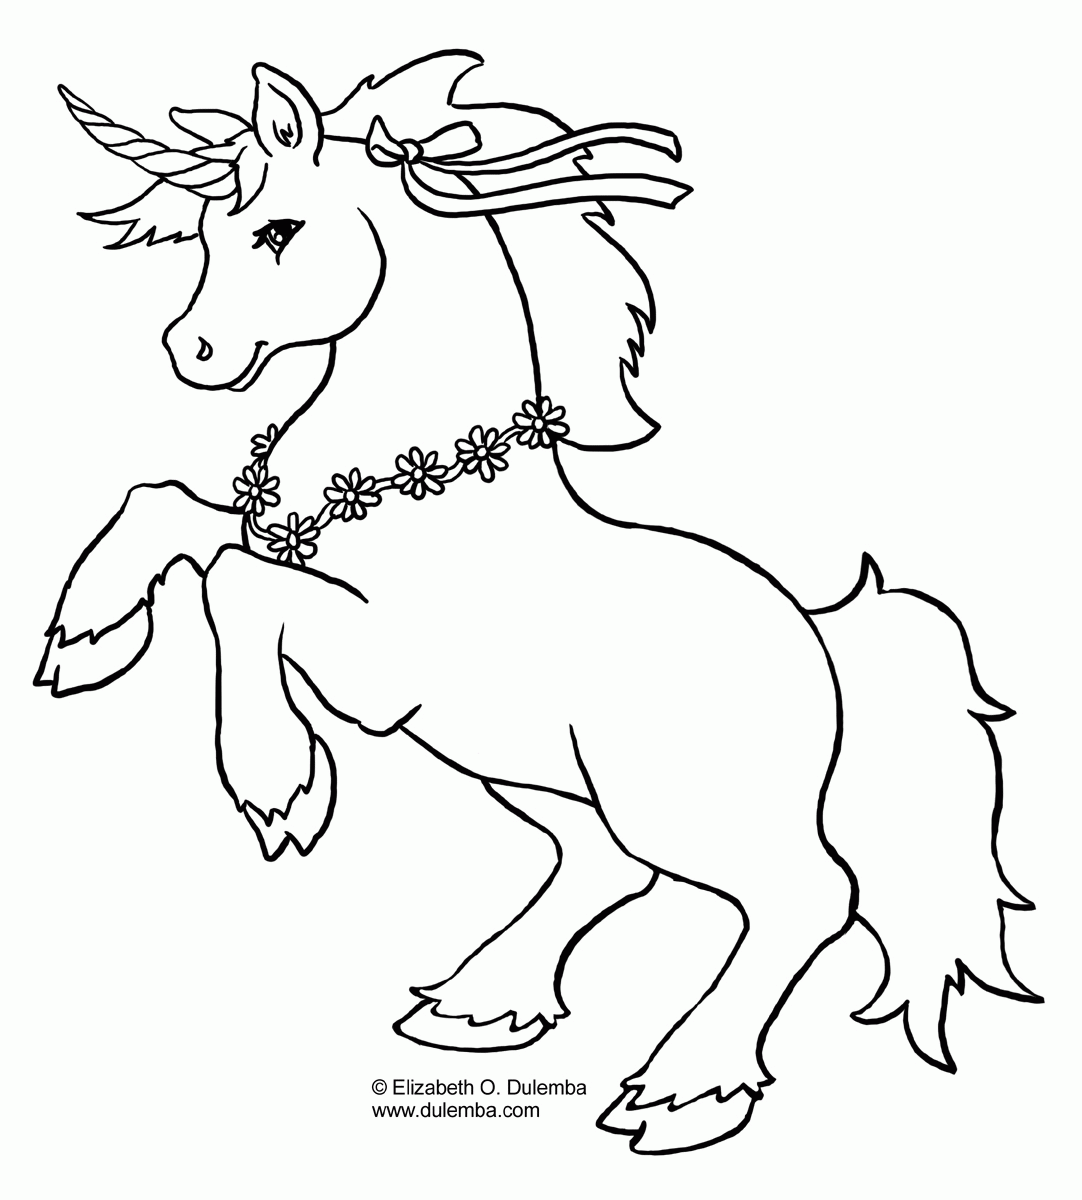 cute-unicorn-image-4-coloring-pages-cartoons-coloring-pages-coloring-pages-for-kids-and-adults